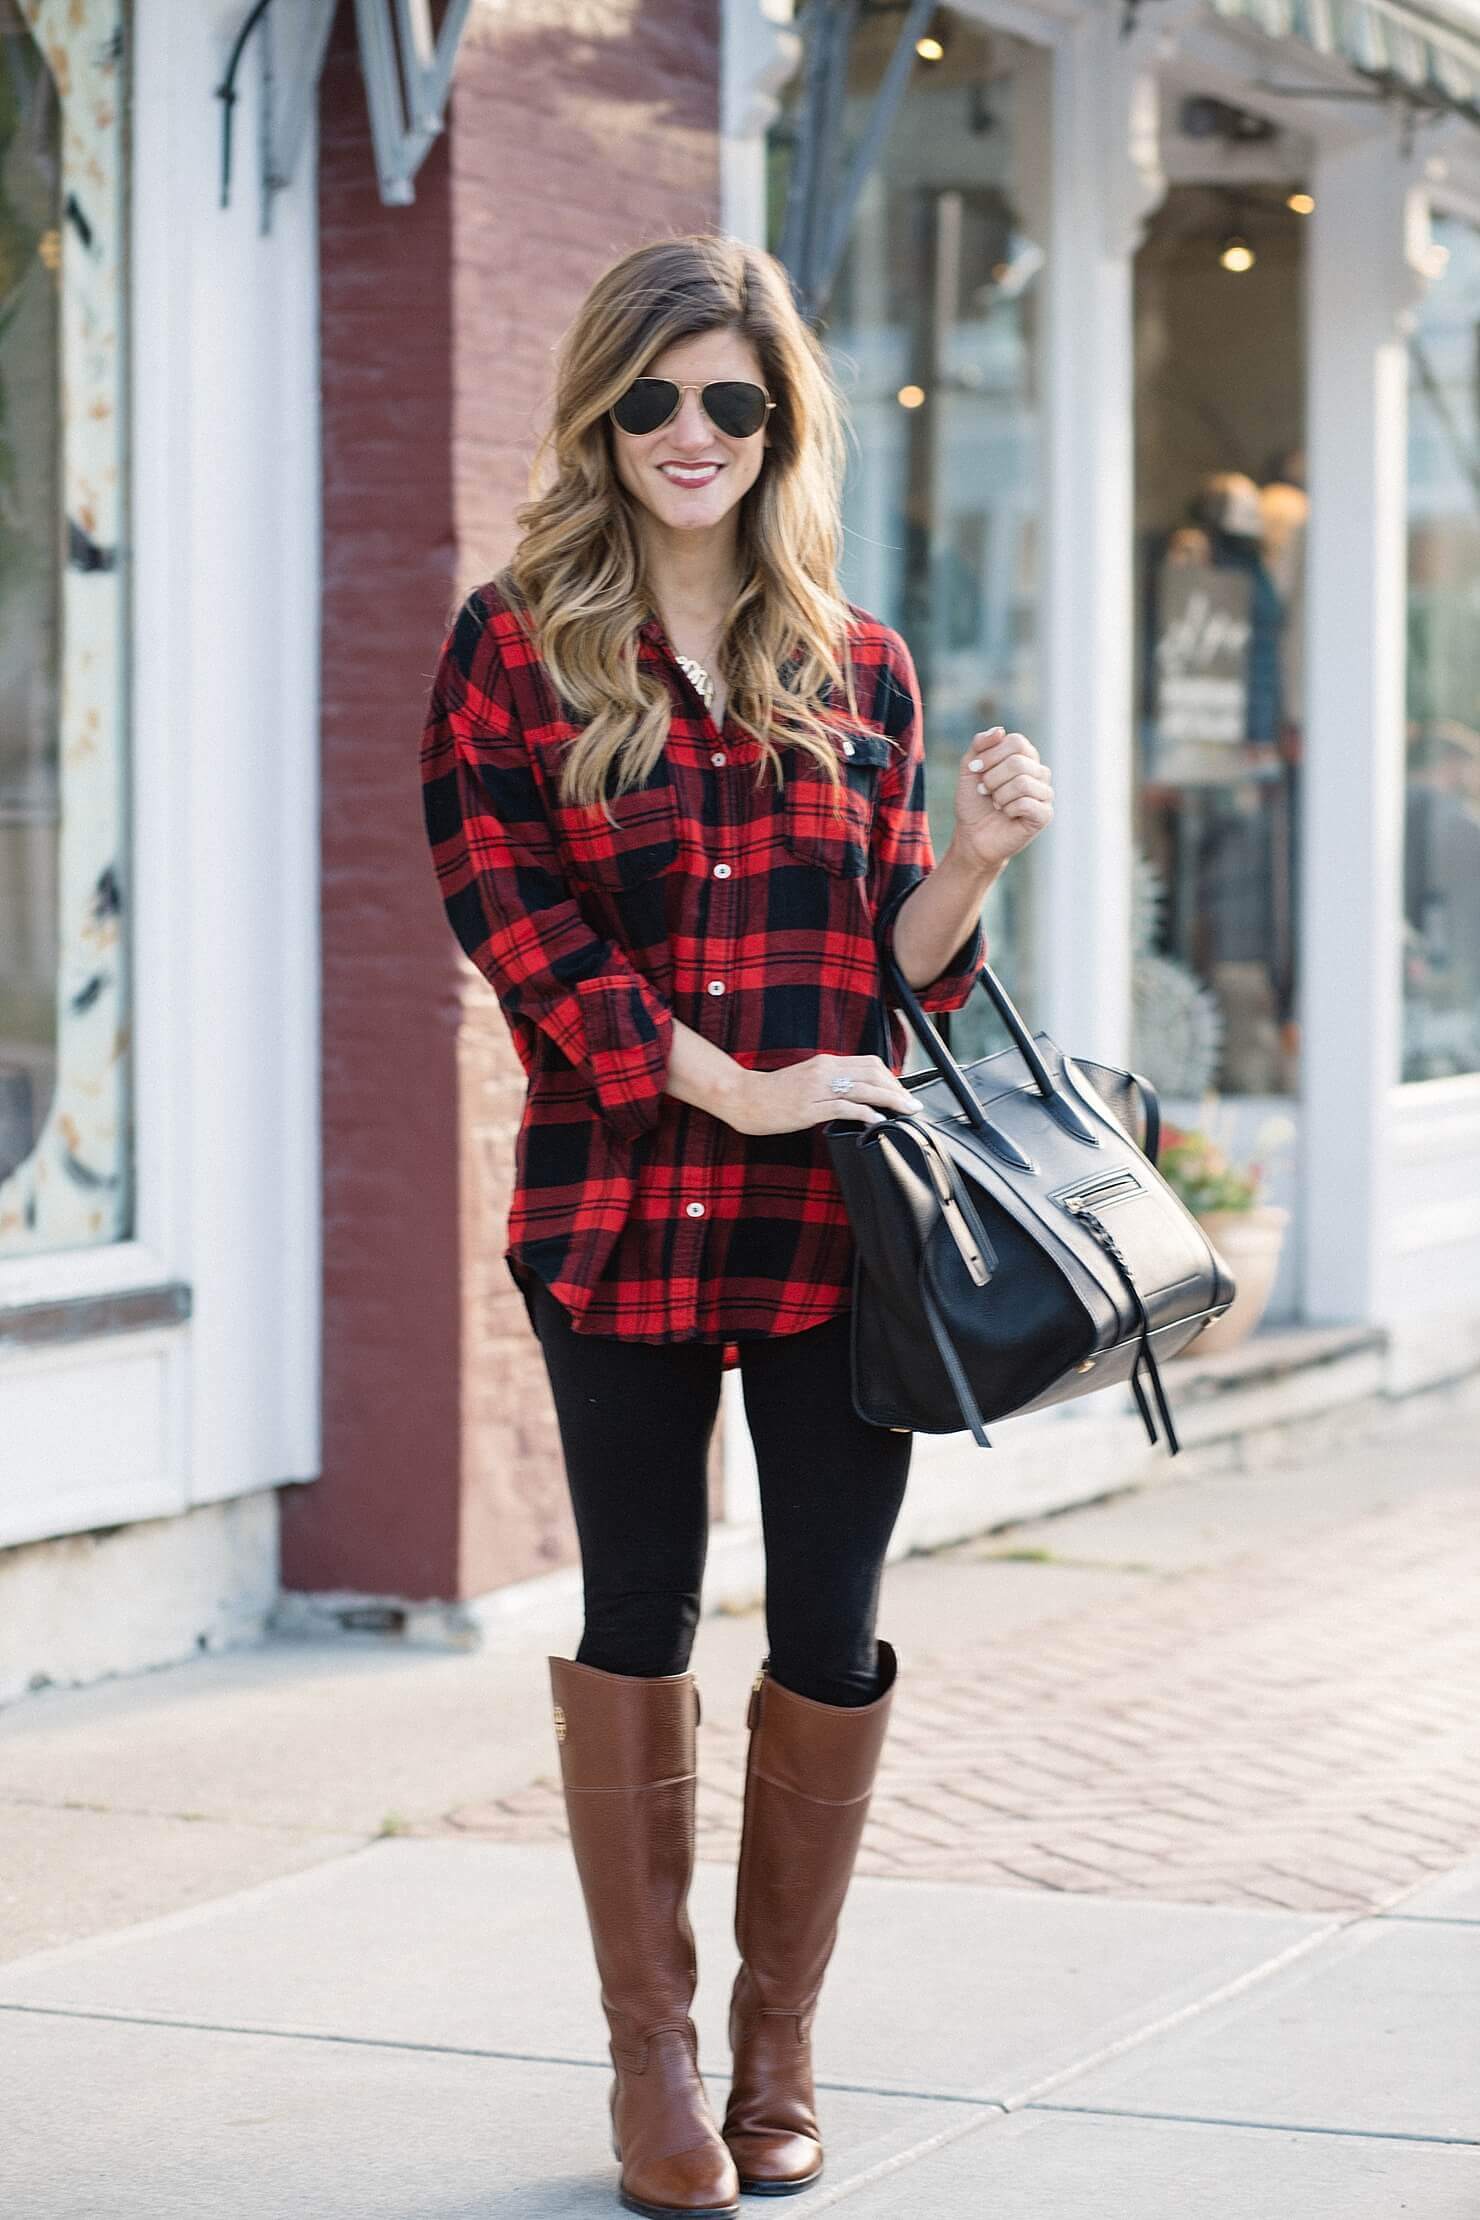 tunic tops and leggings outfits